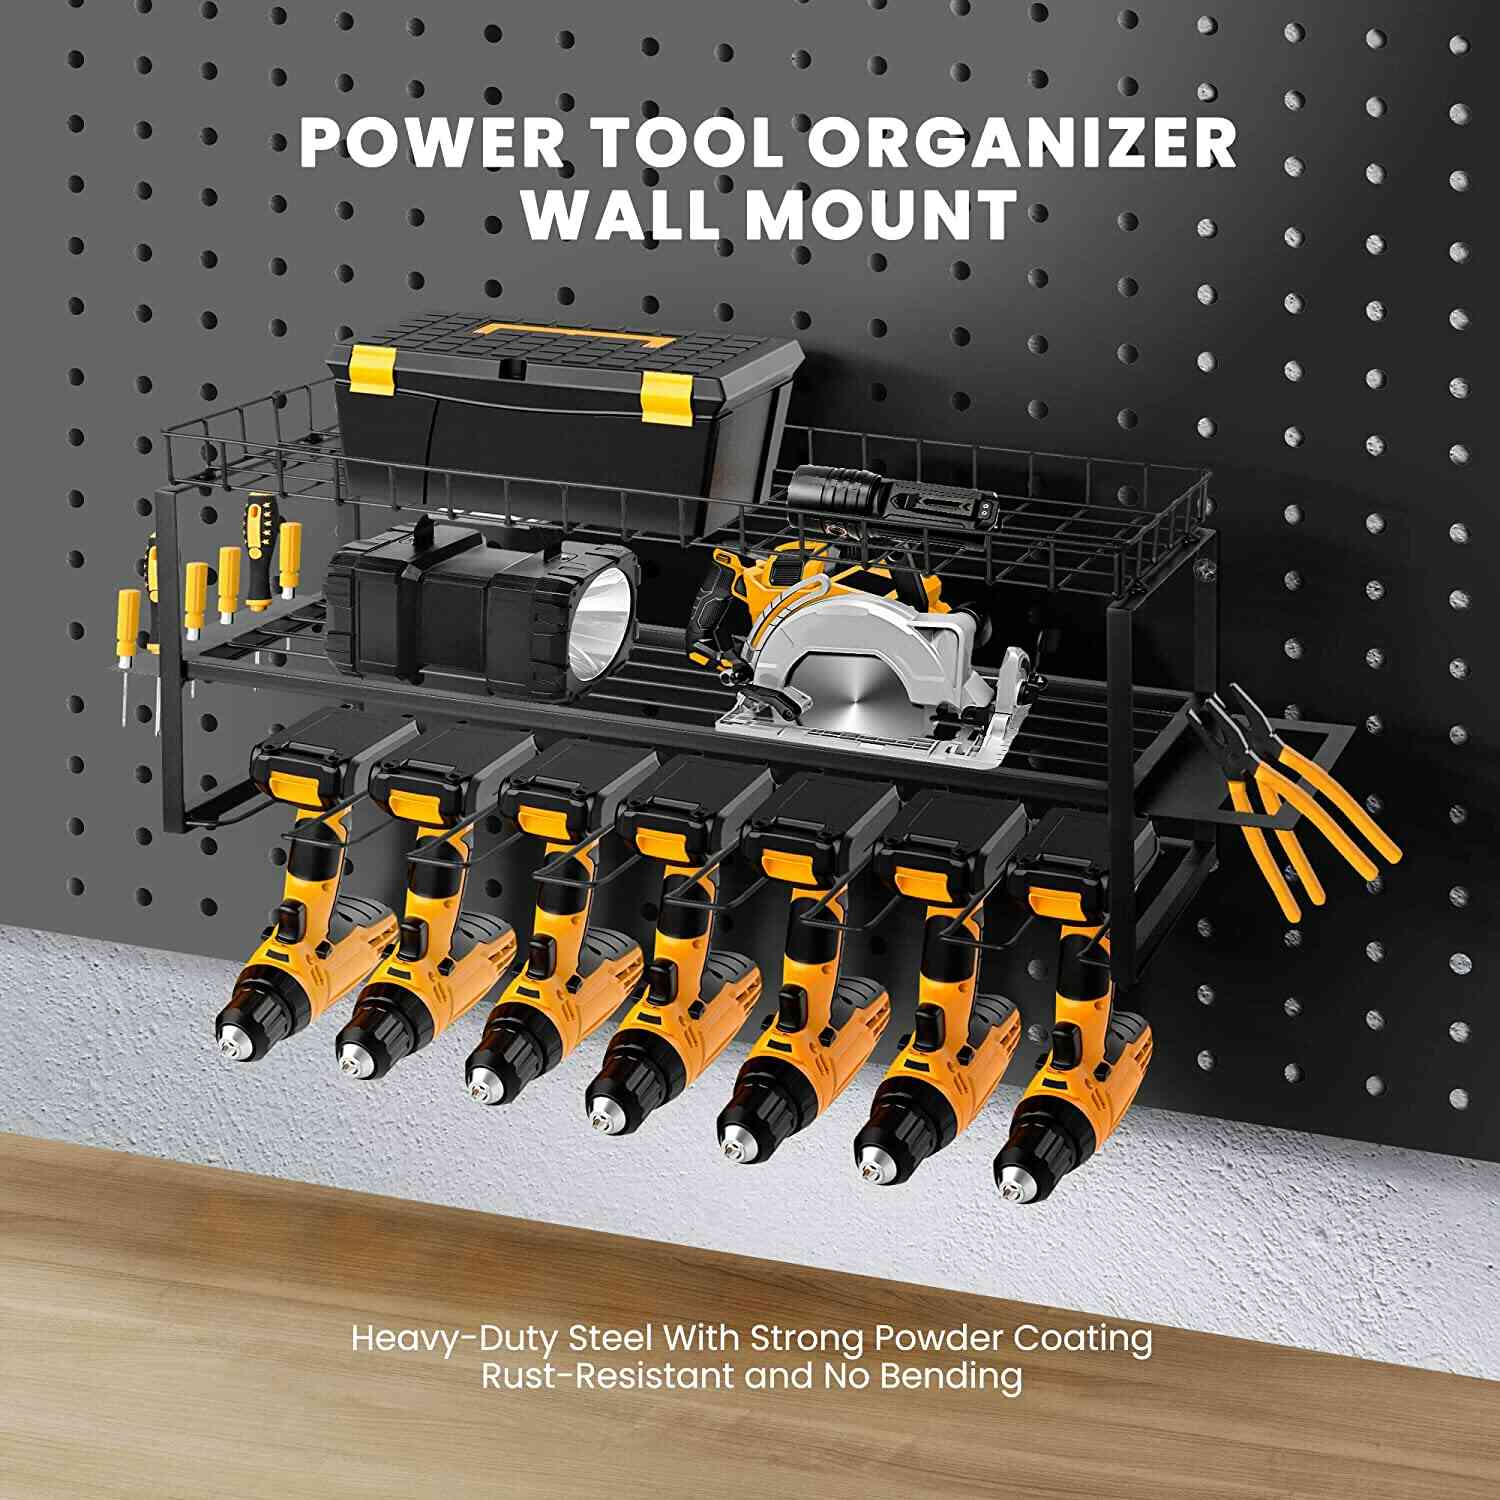 SPECSTAR Power Tool Organizer Wall Mount 3 Layers Heavy Duty Tool Shelf with 7 Drill Holders